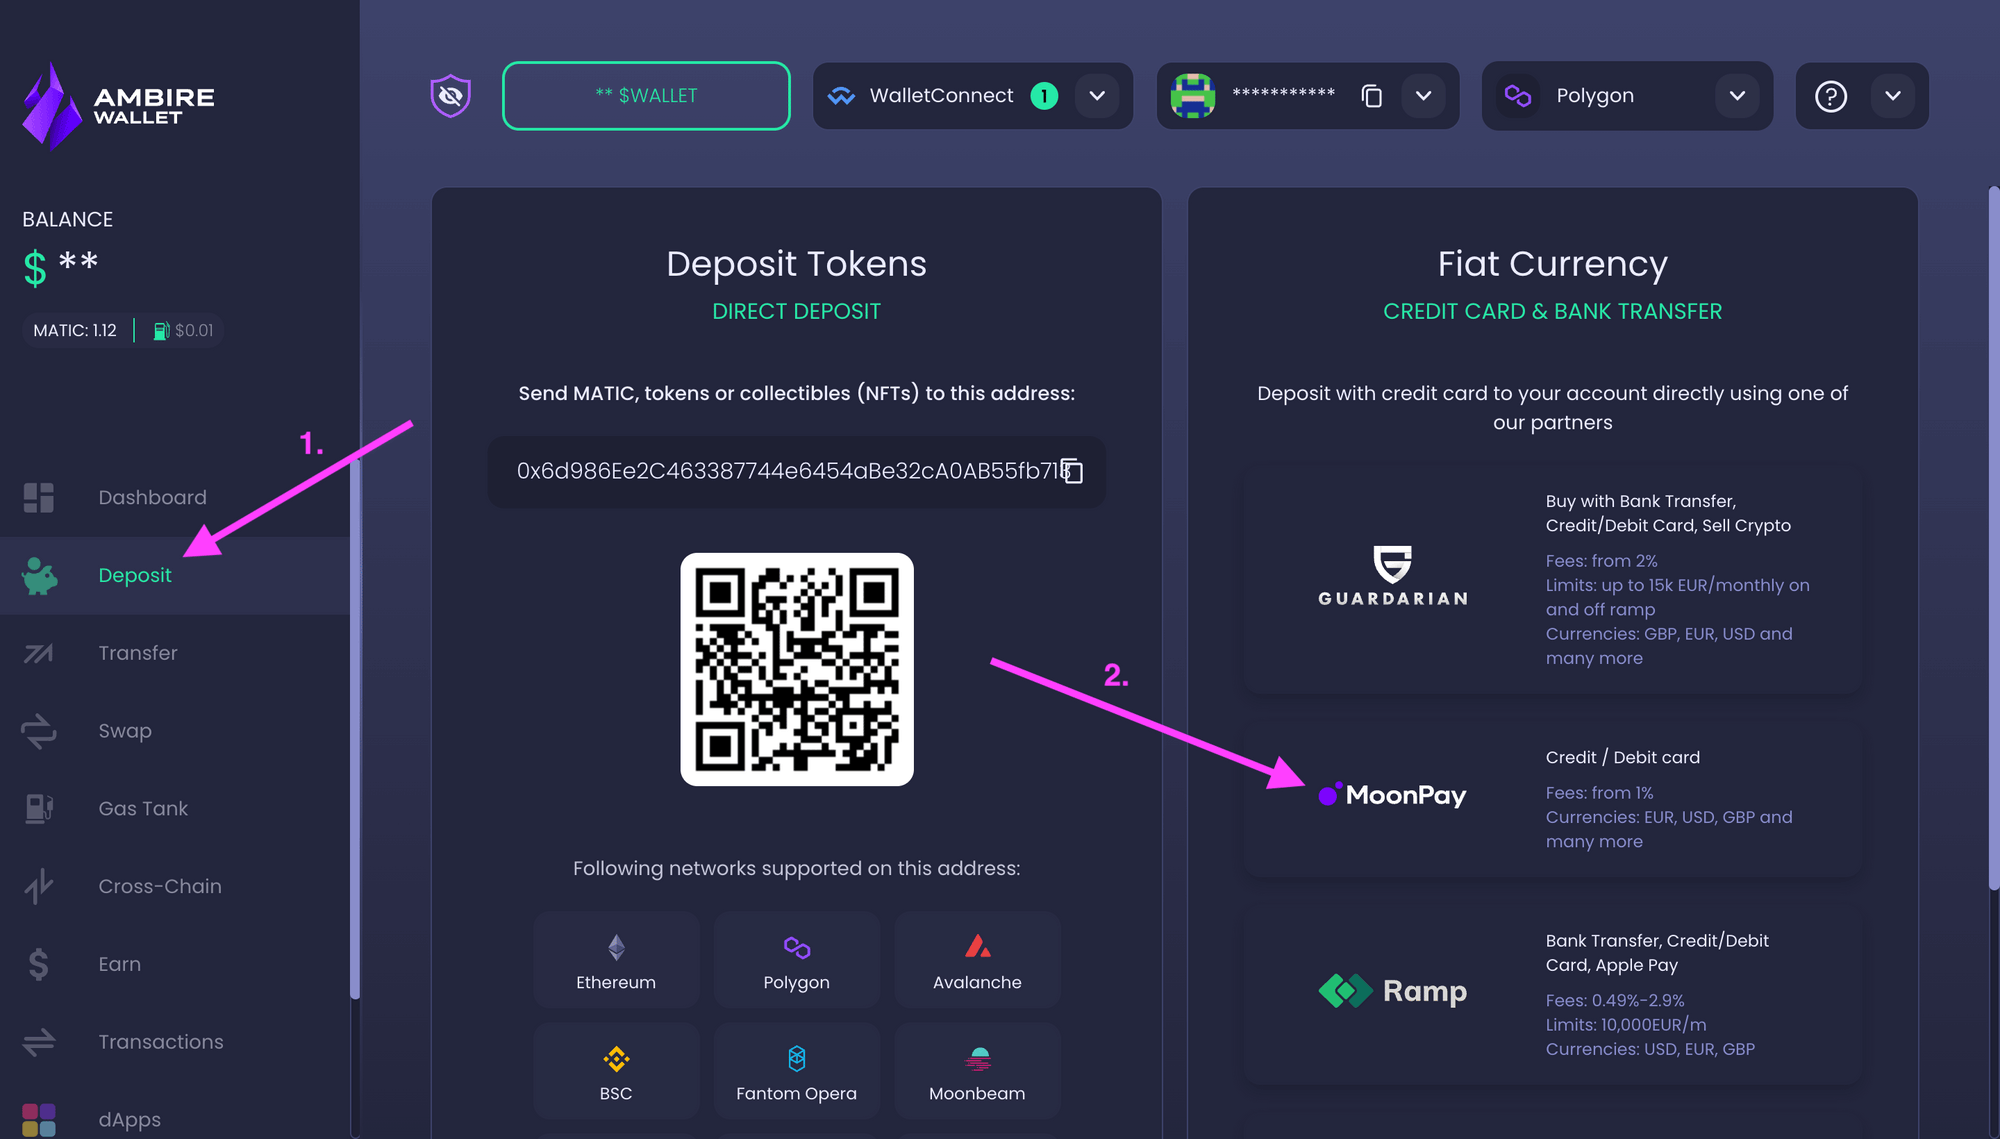 A screenshot illustrating the steps to funding MoonPay crypto on/off-ramp 1 of 2